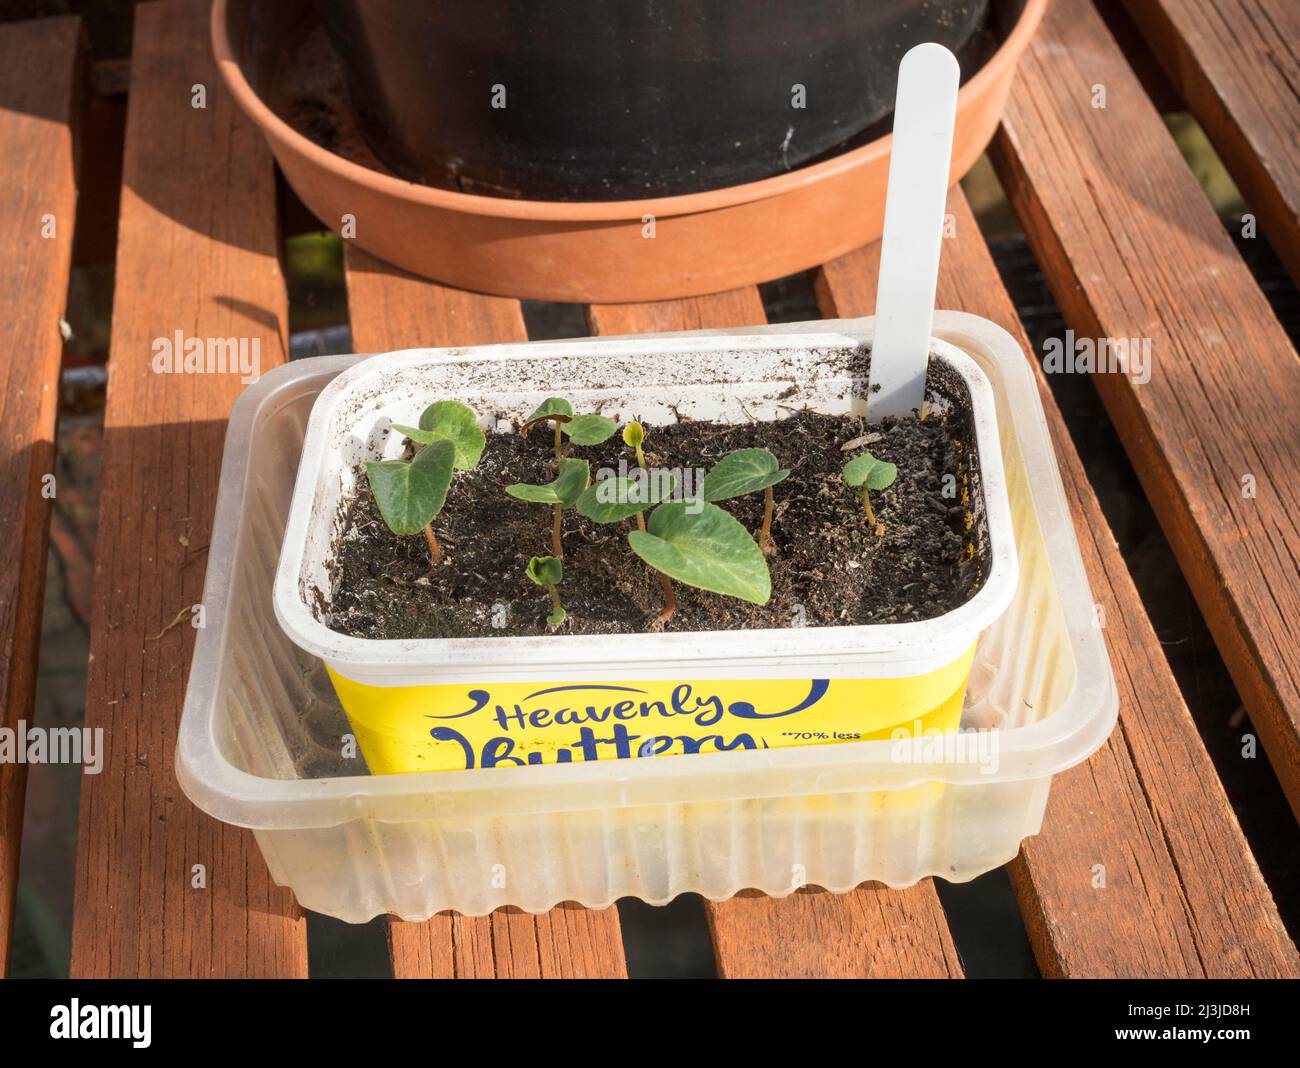 Cyclamen Latinia seedlings grown in recycled plastic food containers, England, UK Stock Photo